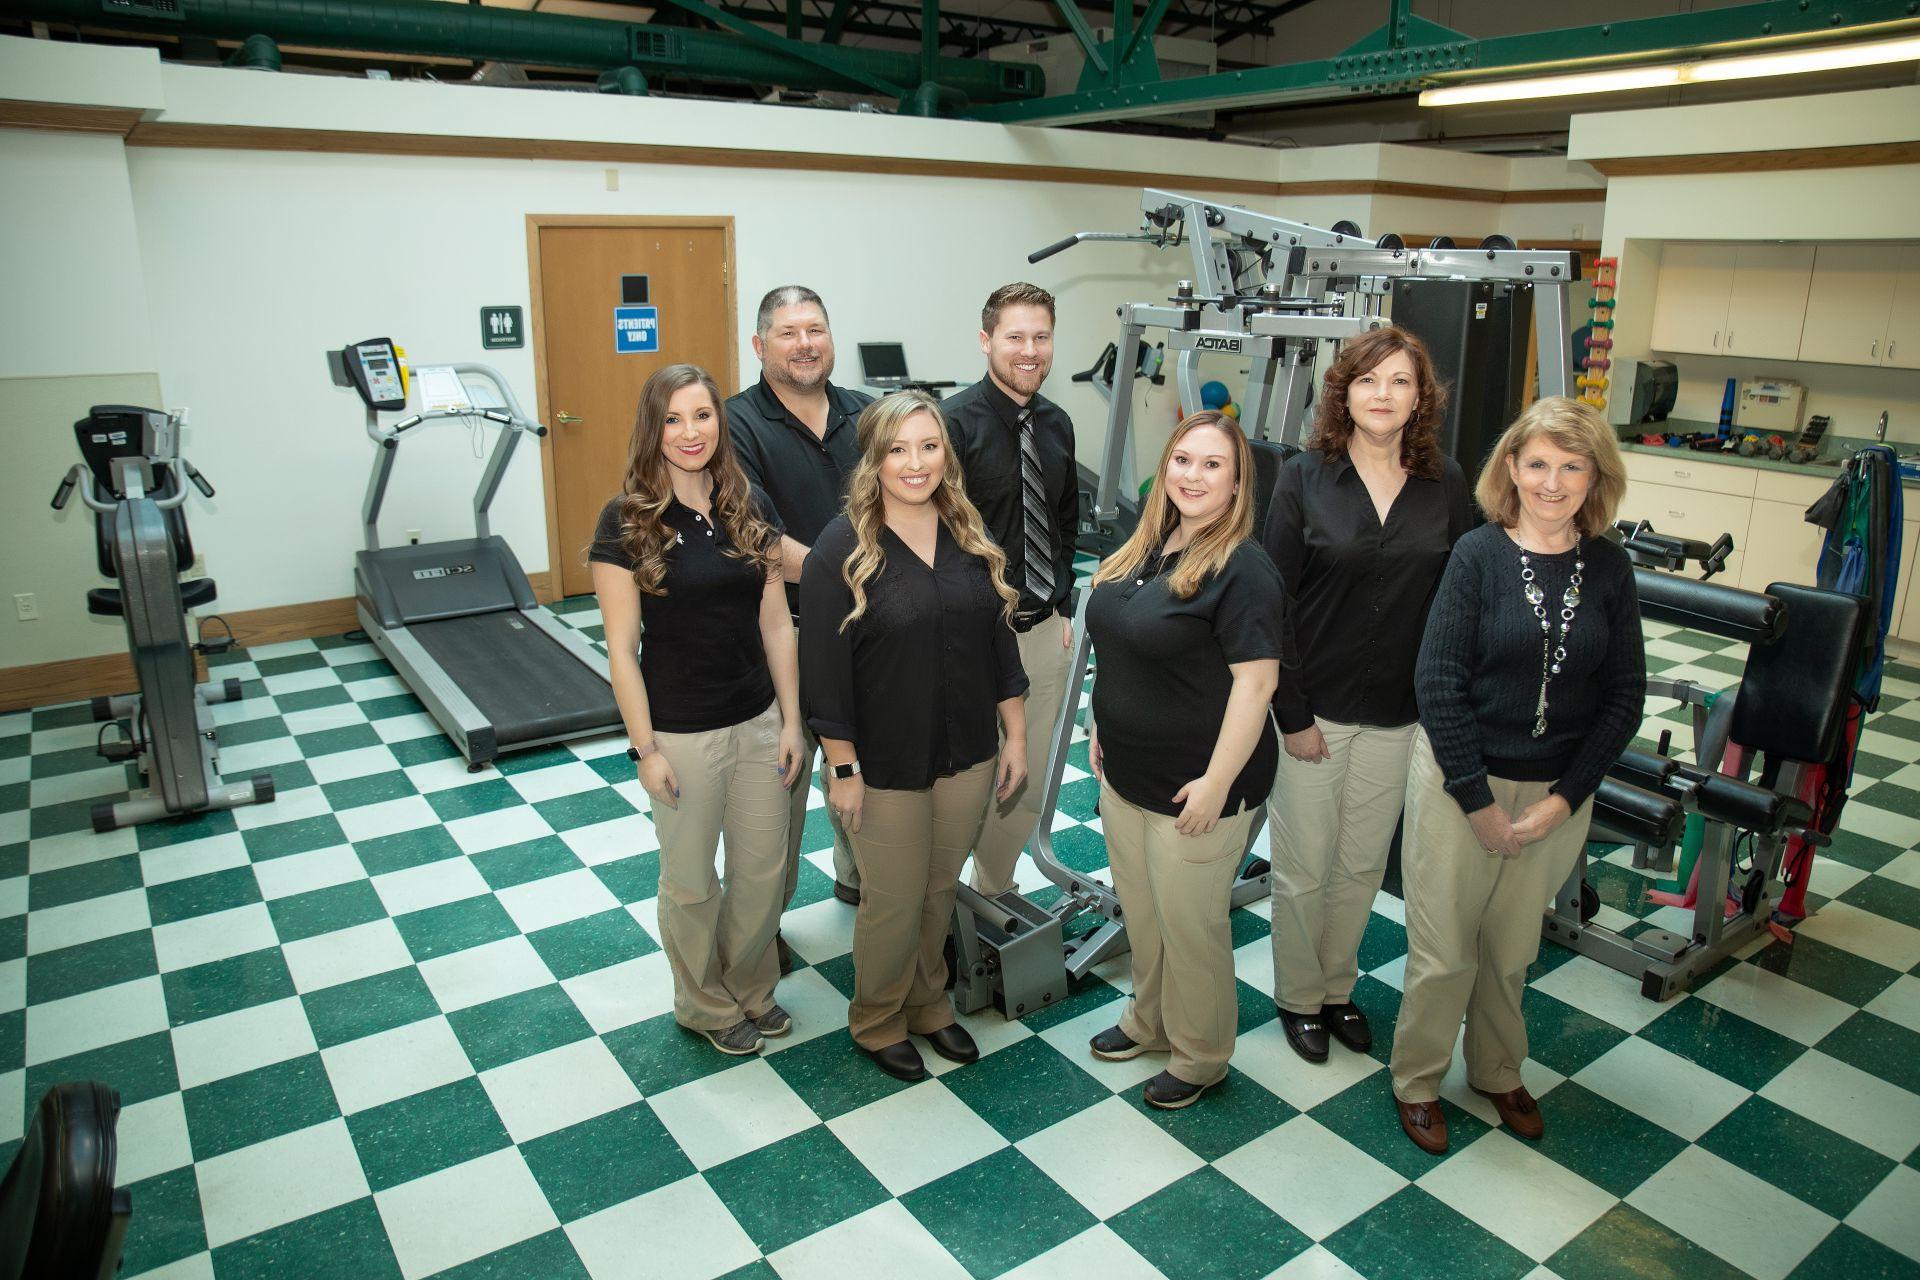 Pictured left to right: Sheila Eplin, Receptionist, Jeanette Toler, PTA, Alicia Clark, SLP, Jacob Jackson, DPT, Emily Cook, DPT, Andrew Toler, Director of Outpatient Rehab, and Krysta Kemp, OT. 